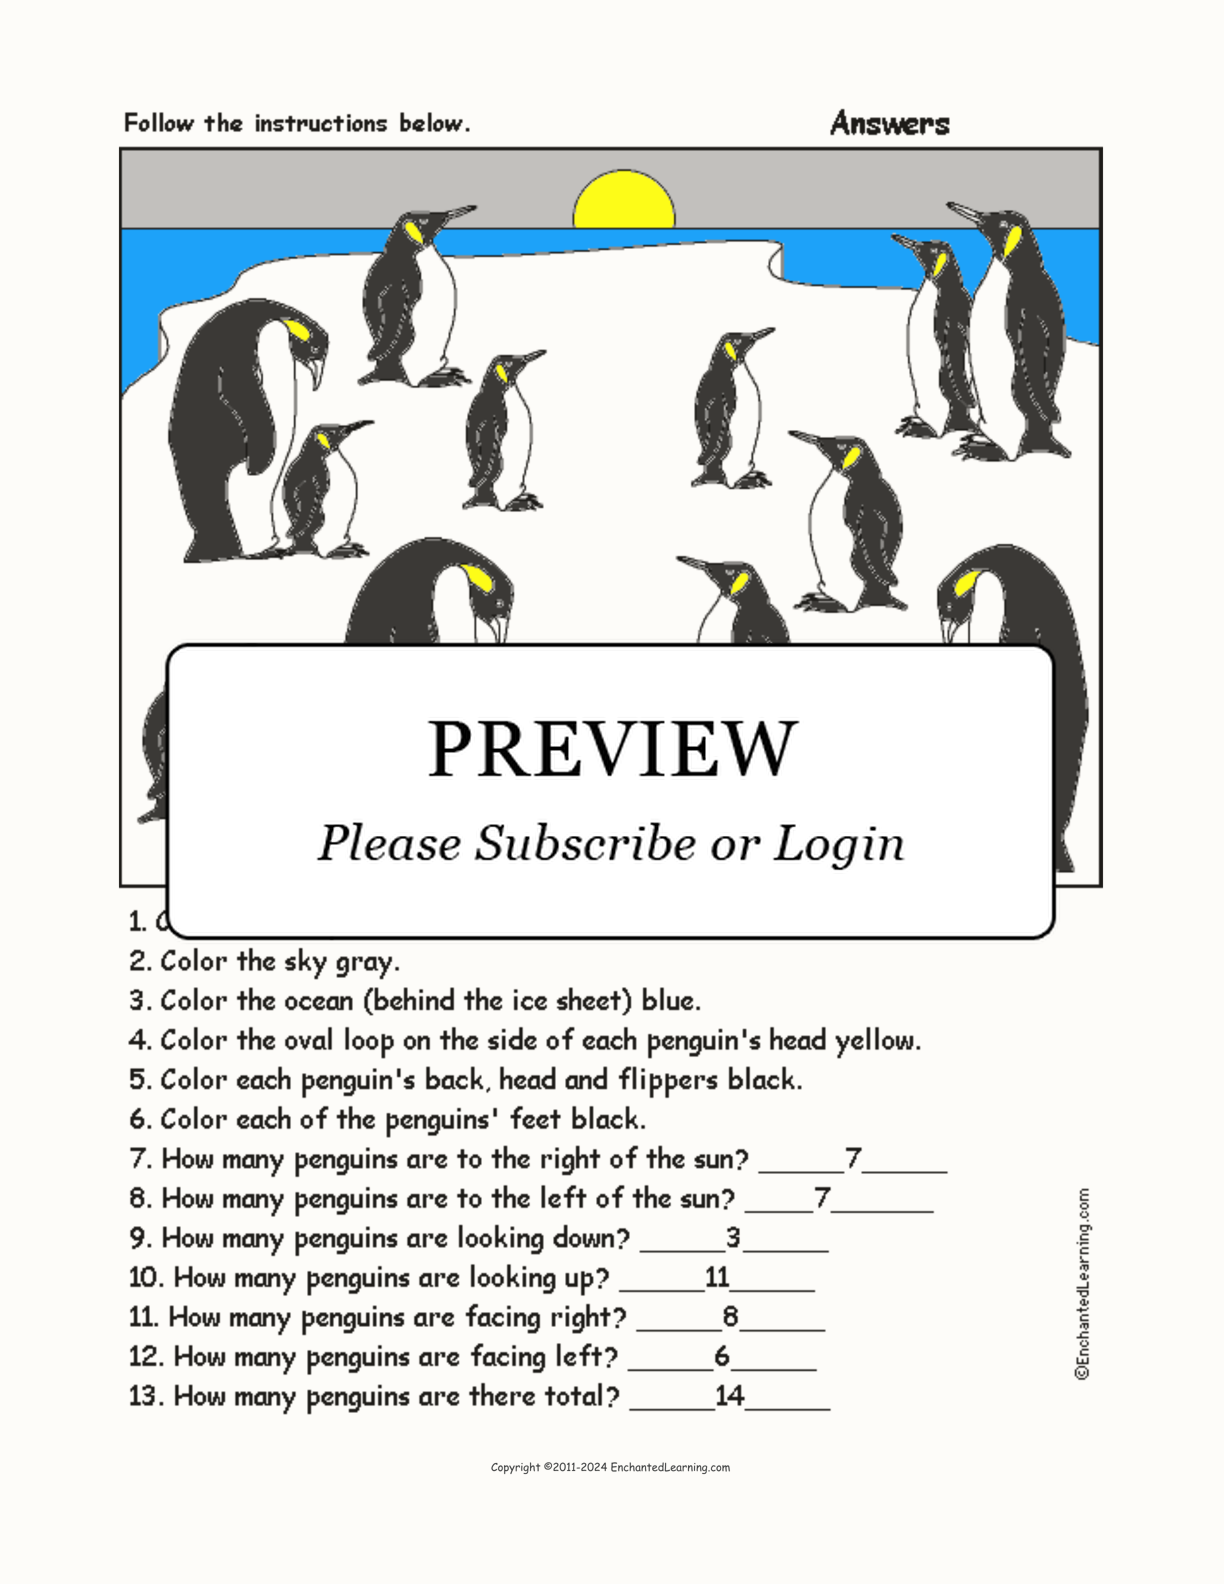 Penguins - Follow the Instructions interactive worksheet page 2